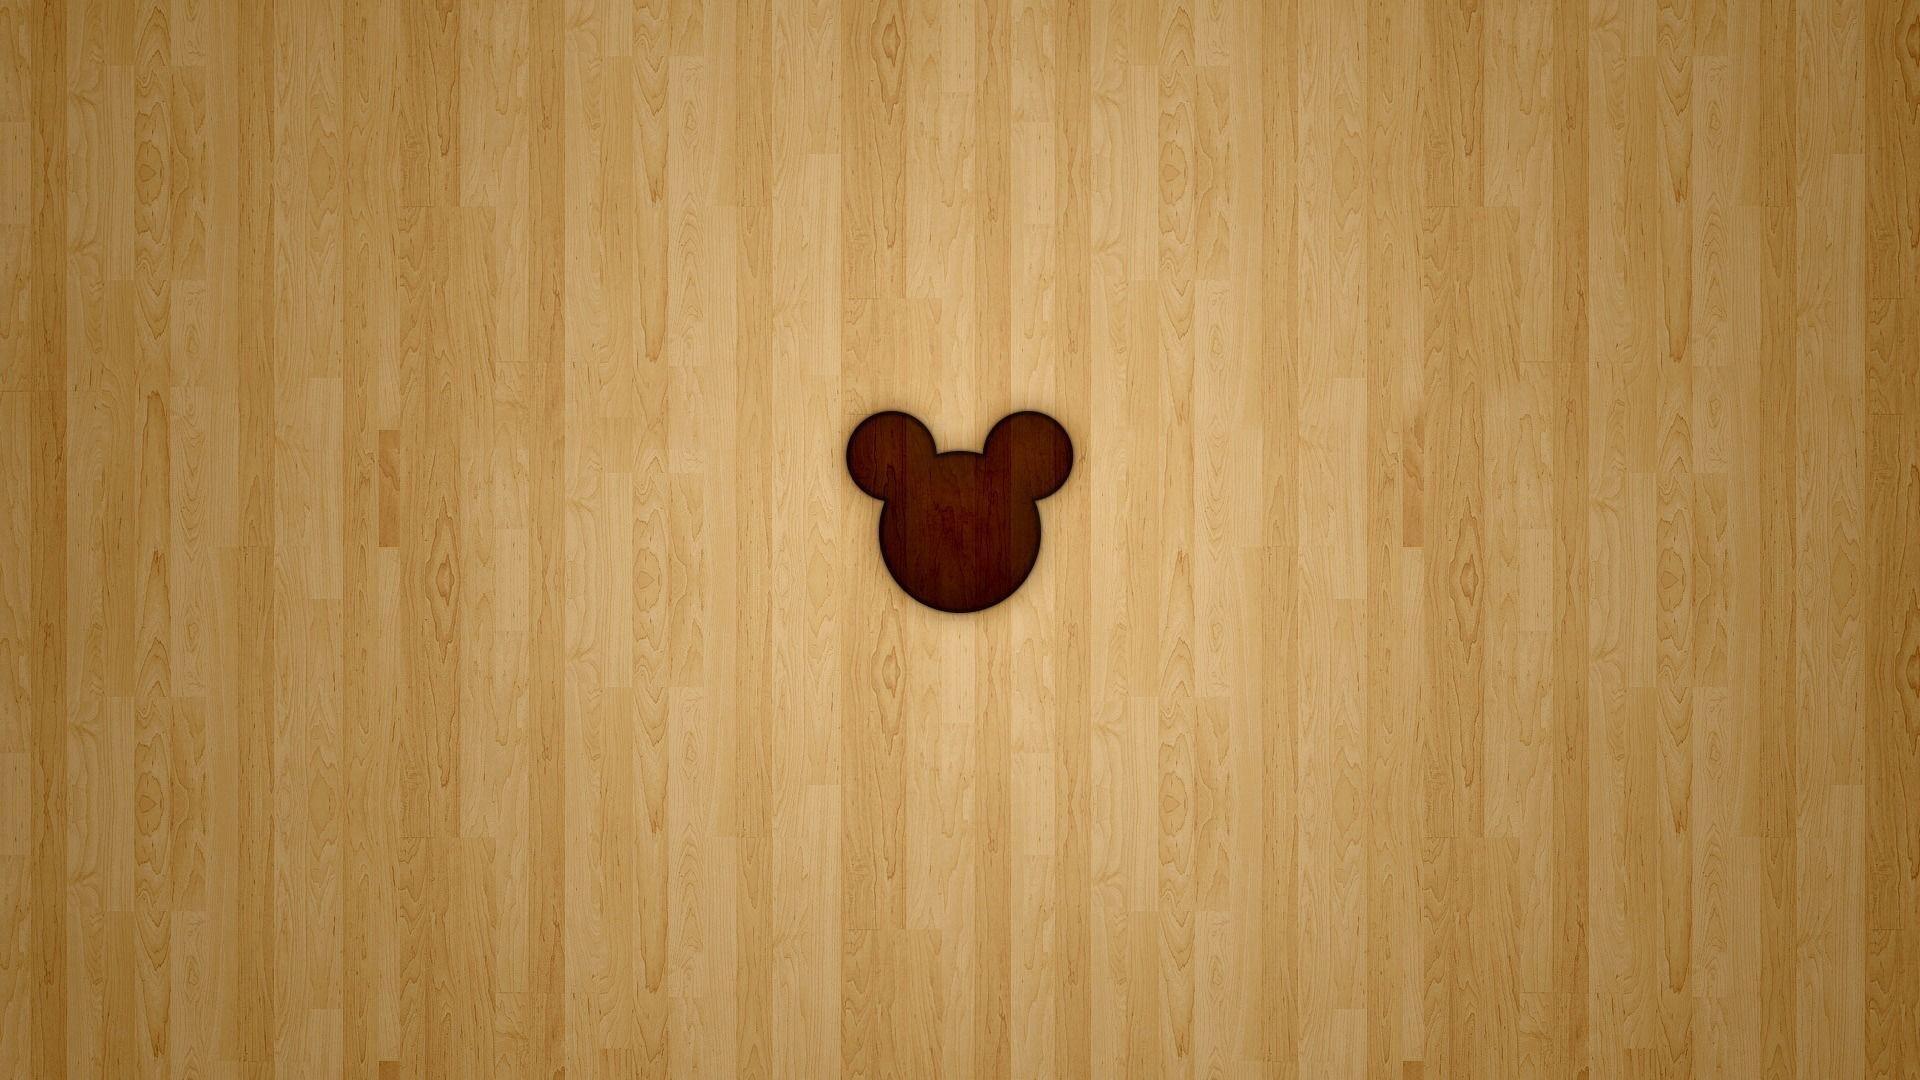 Mickey Mouse Wallpaper 21232 1920x1080 px